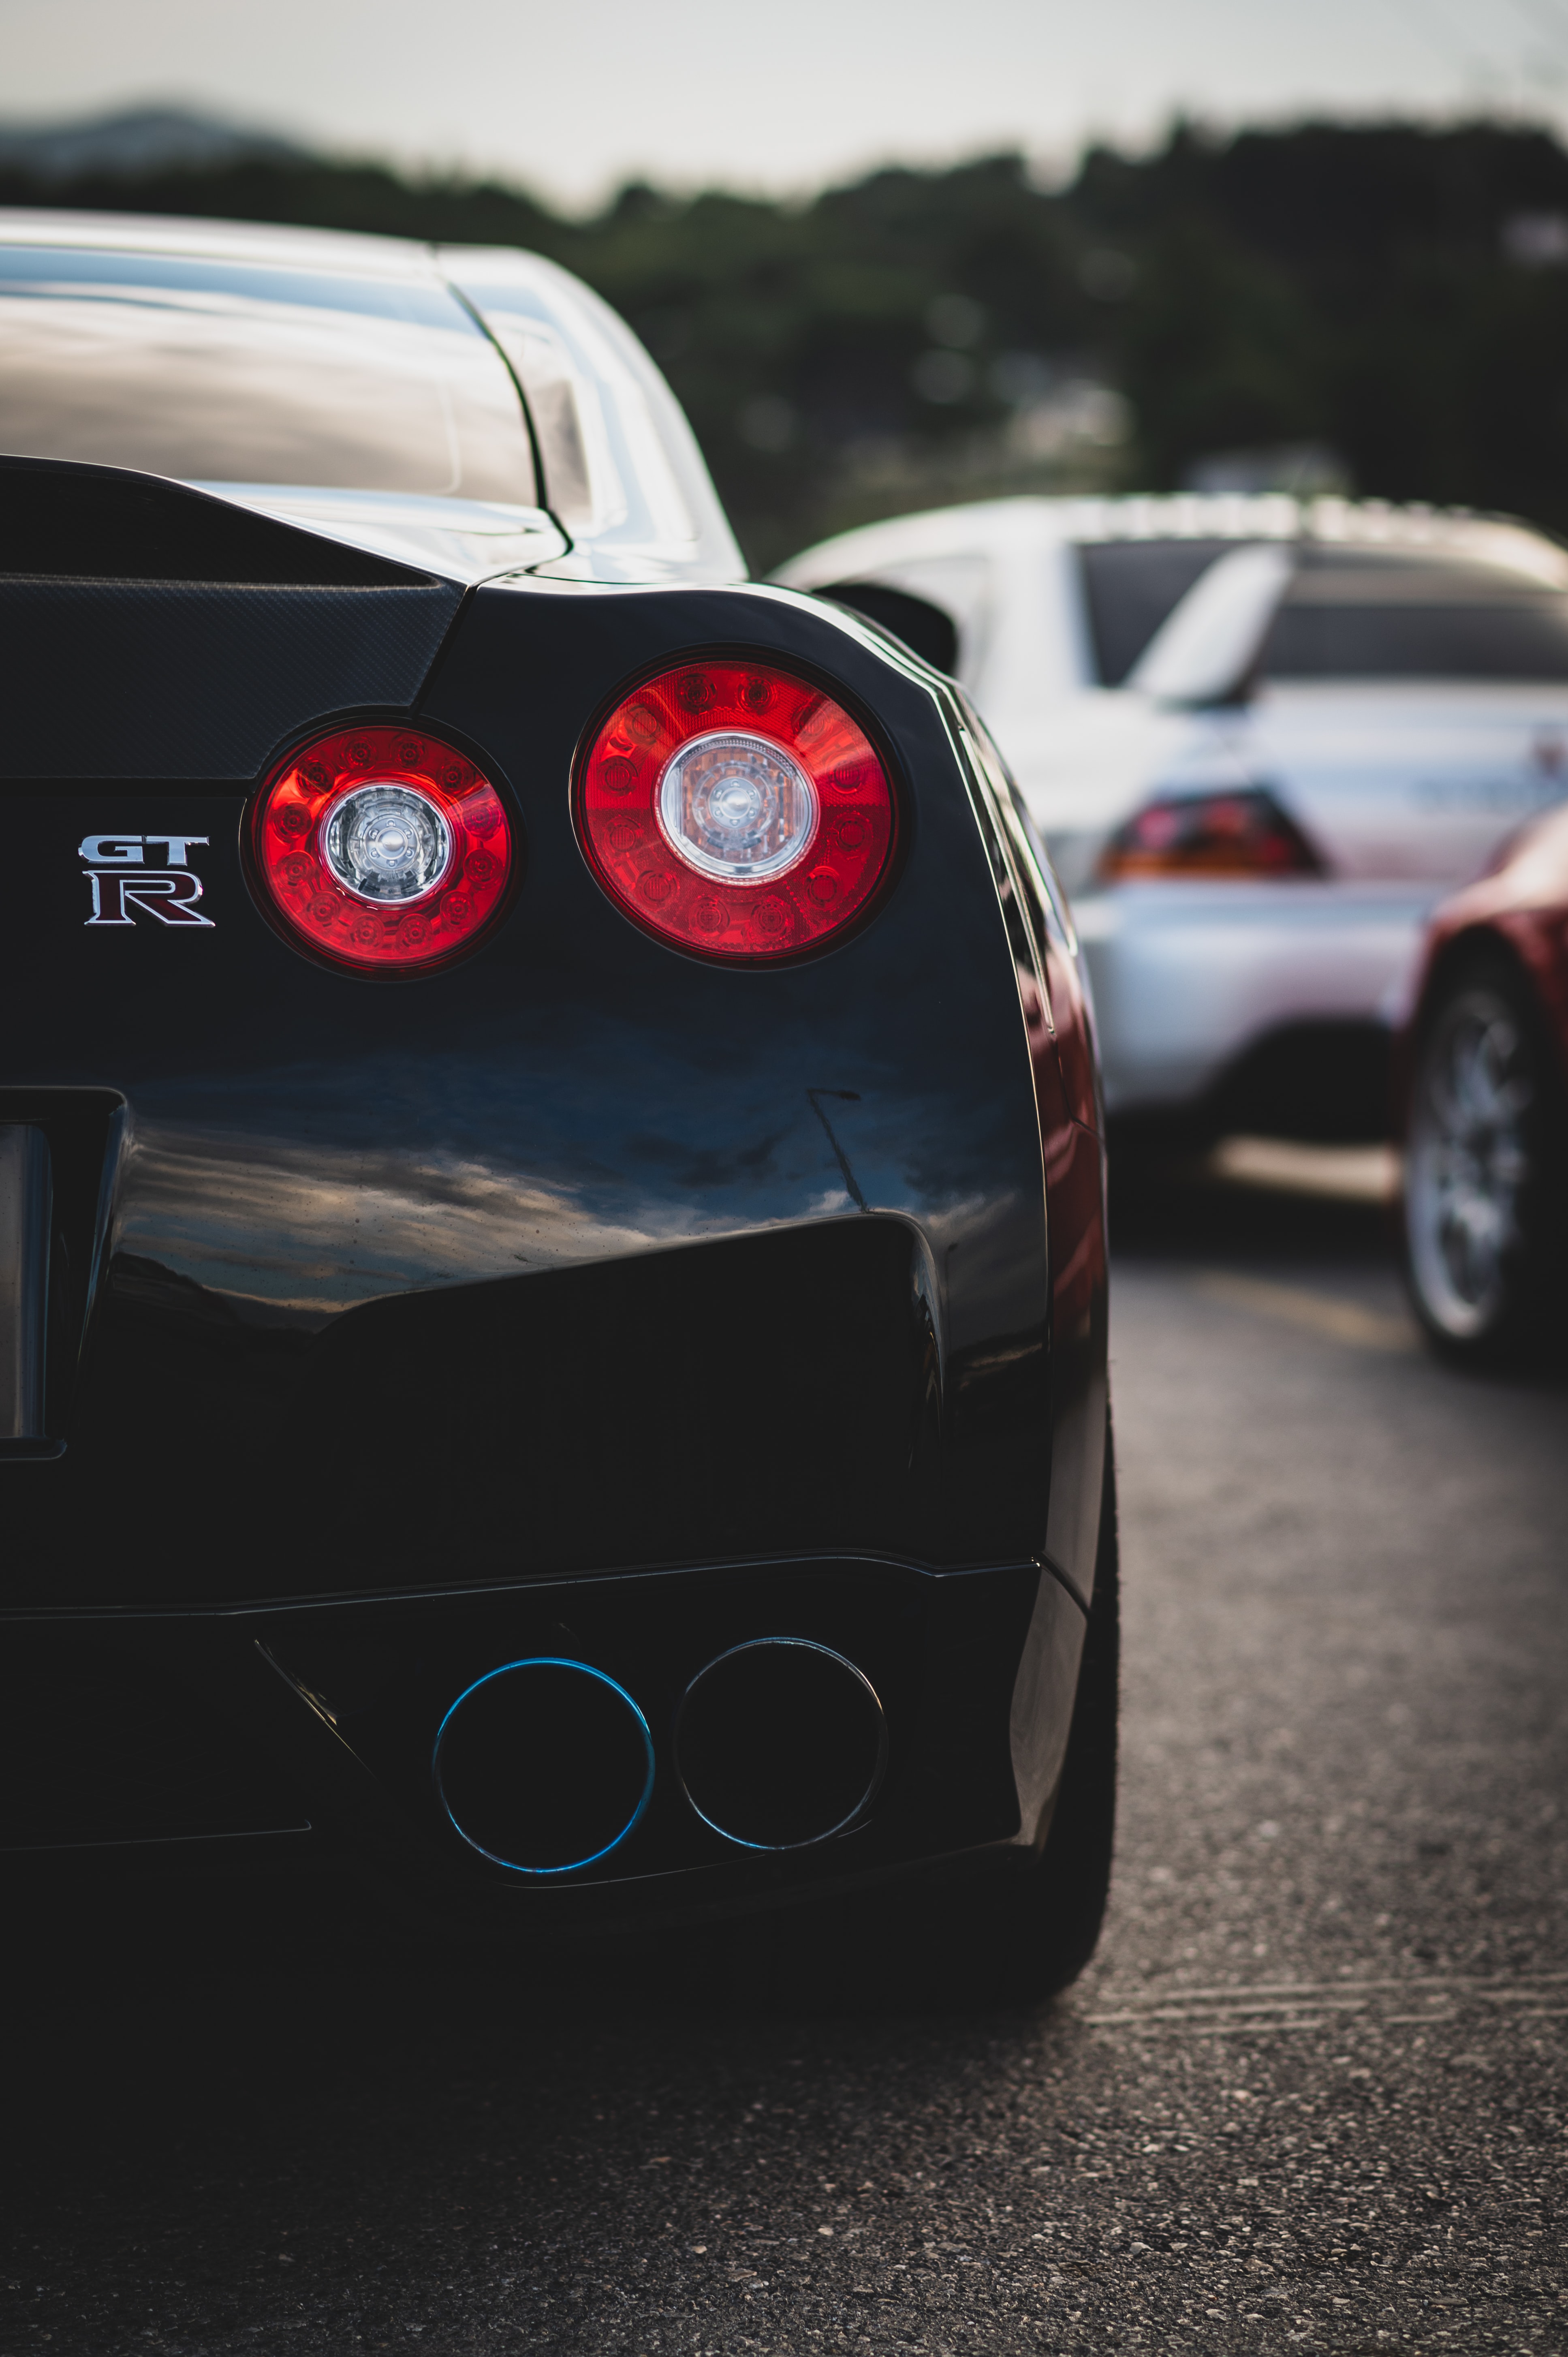 Best Nissan Gt-R wallpapers for phone screen